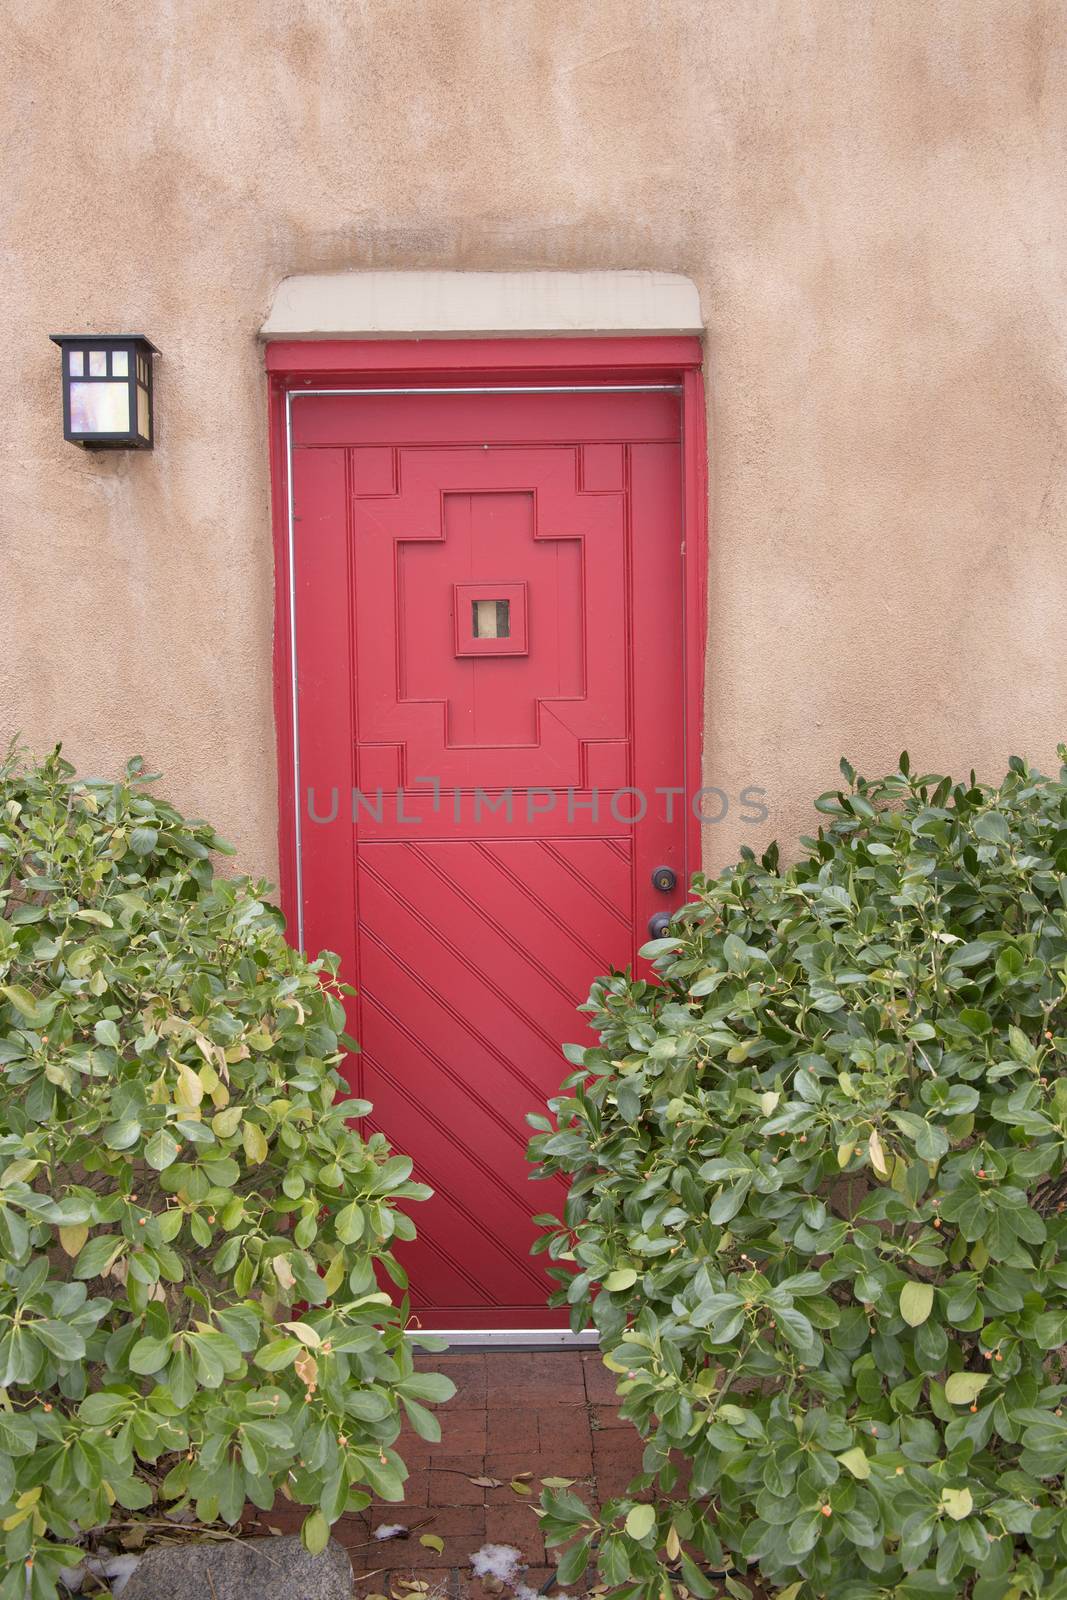 Santa Fe New Mexico The Red Door by JCoulter